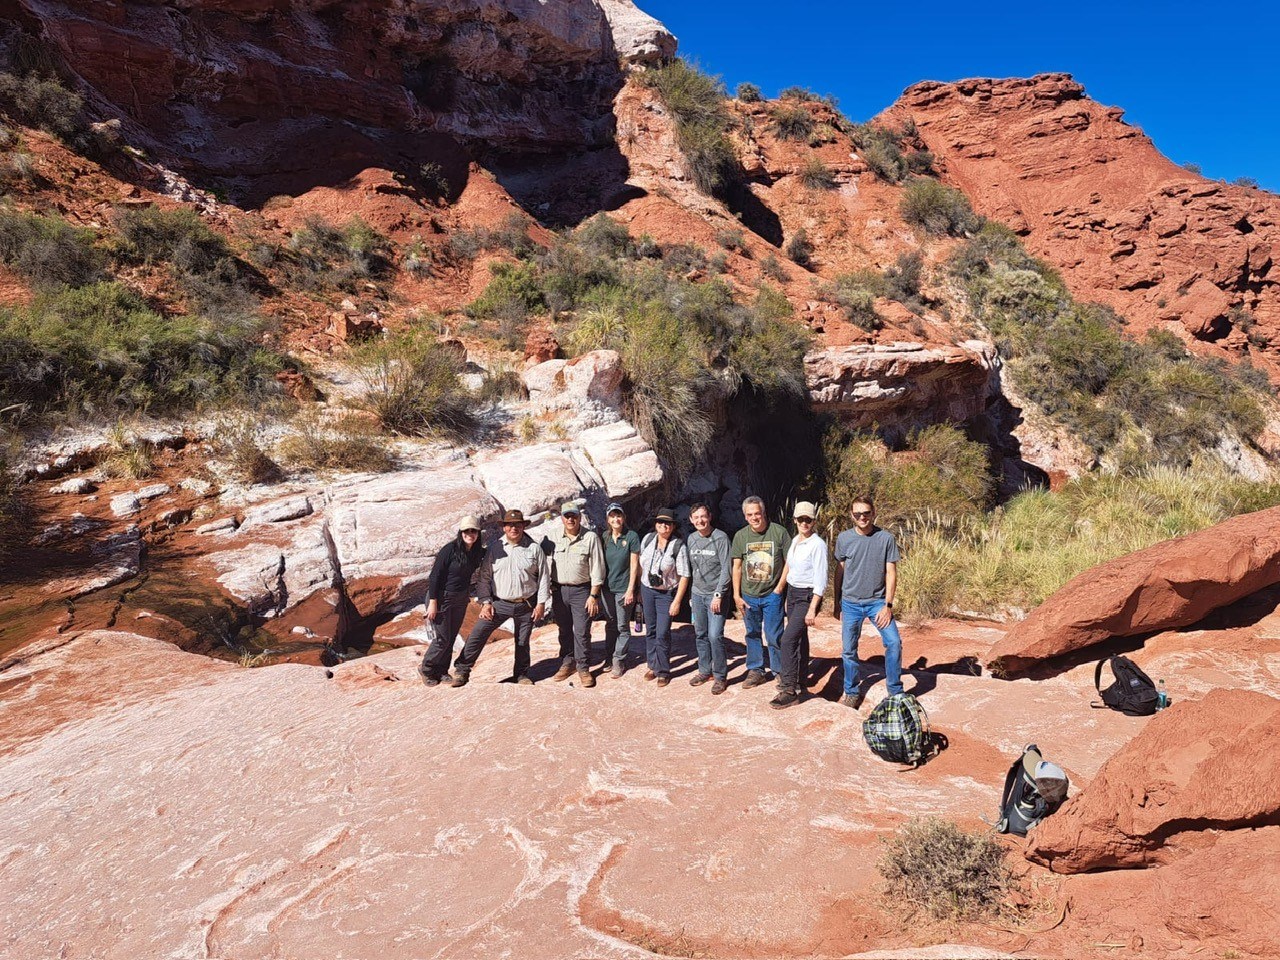 Photo of a group of people in a desert canyon.